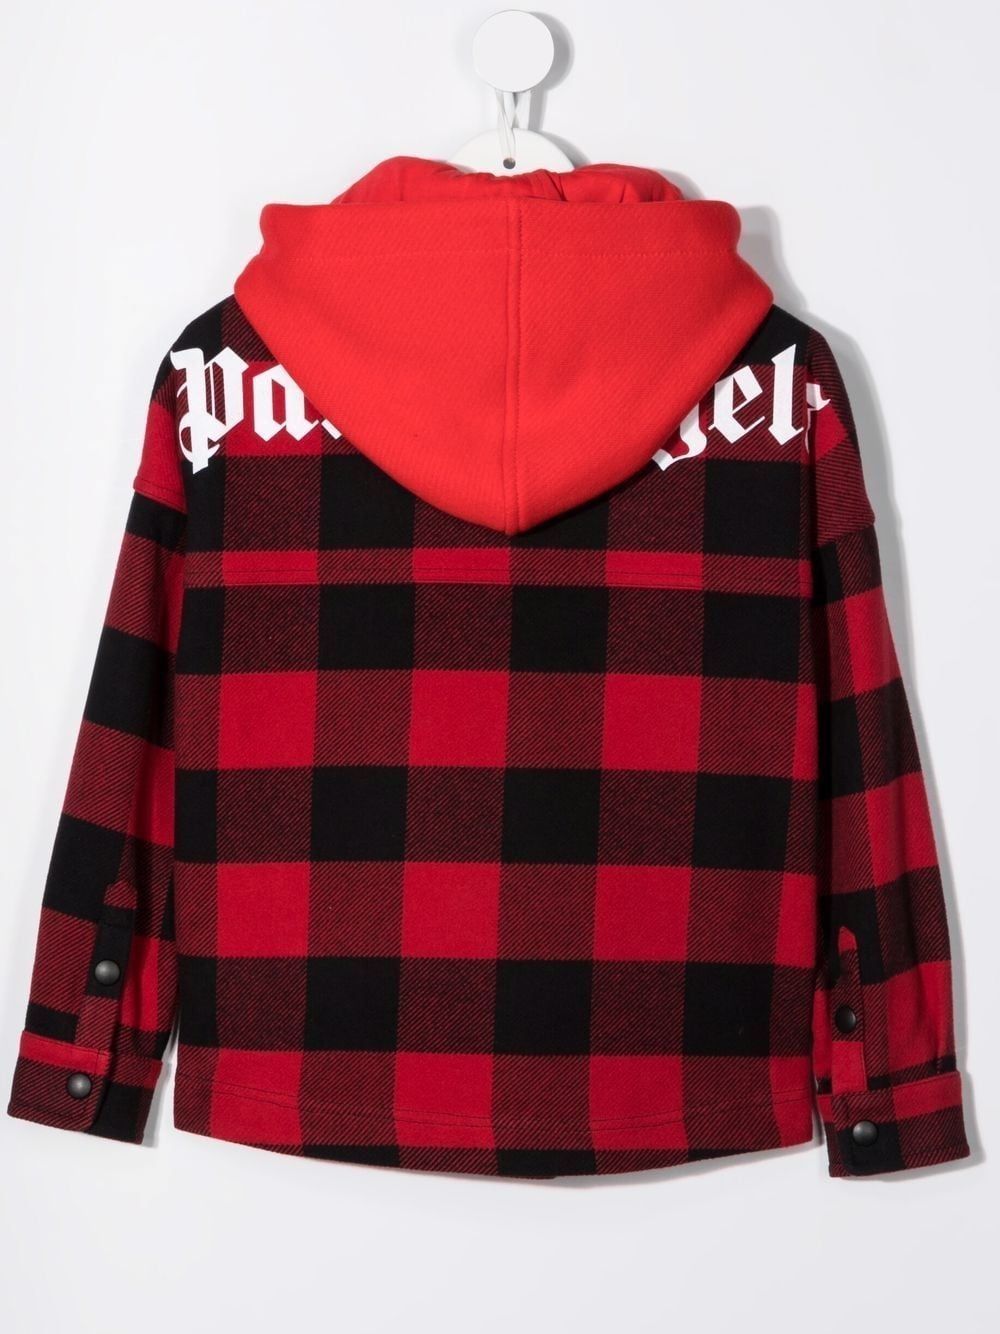 Red and black shirt for boys